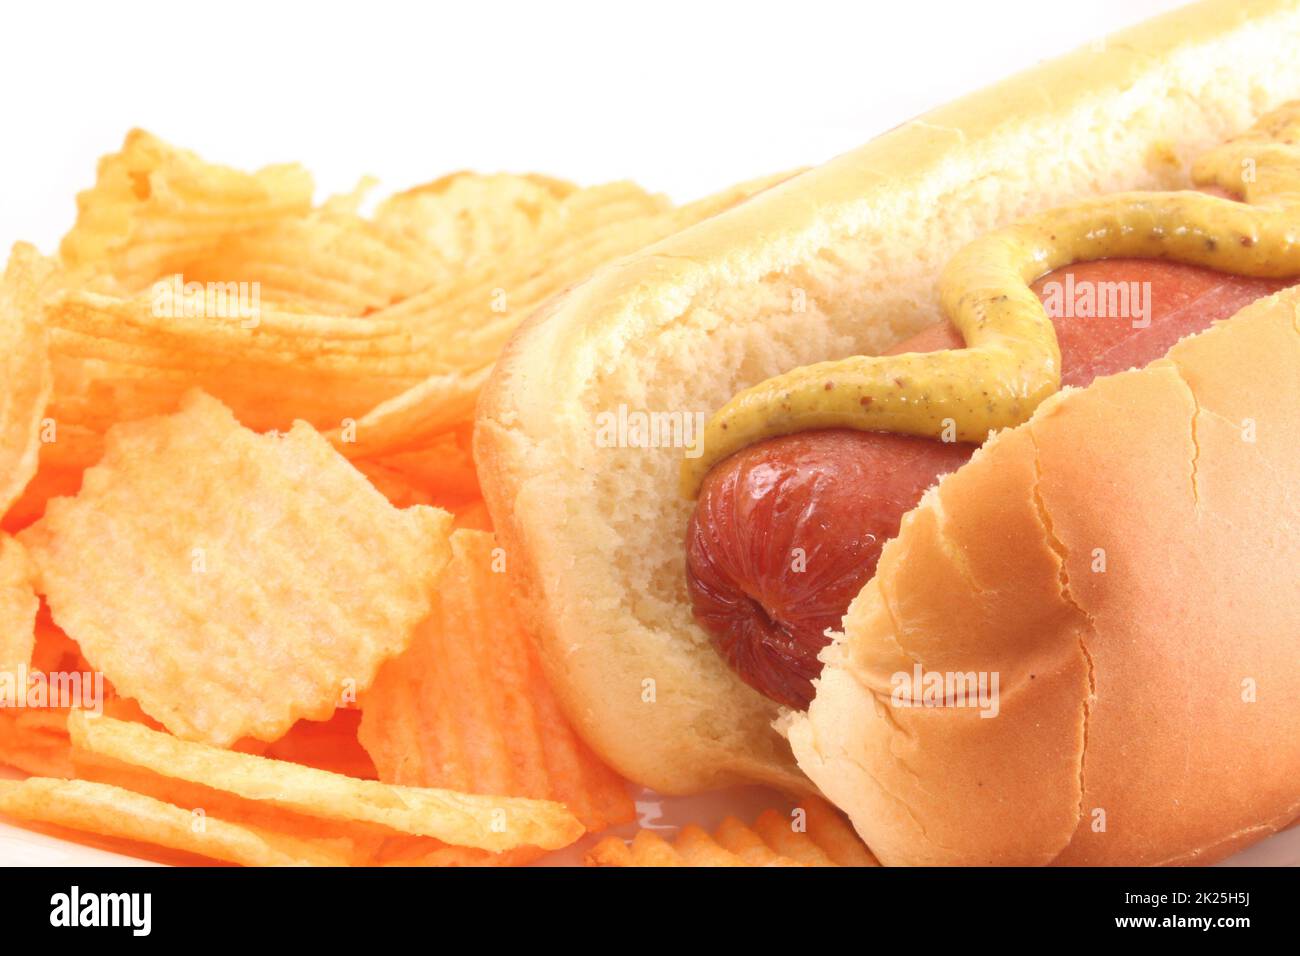 hot Dog With Mustard and Potato Chips Isolated on White Stock Photo